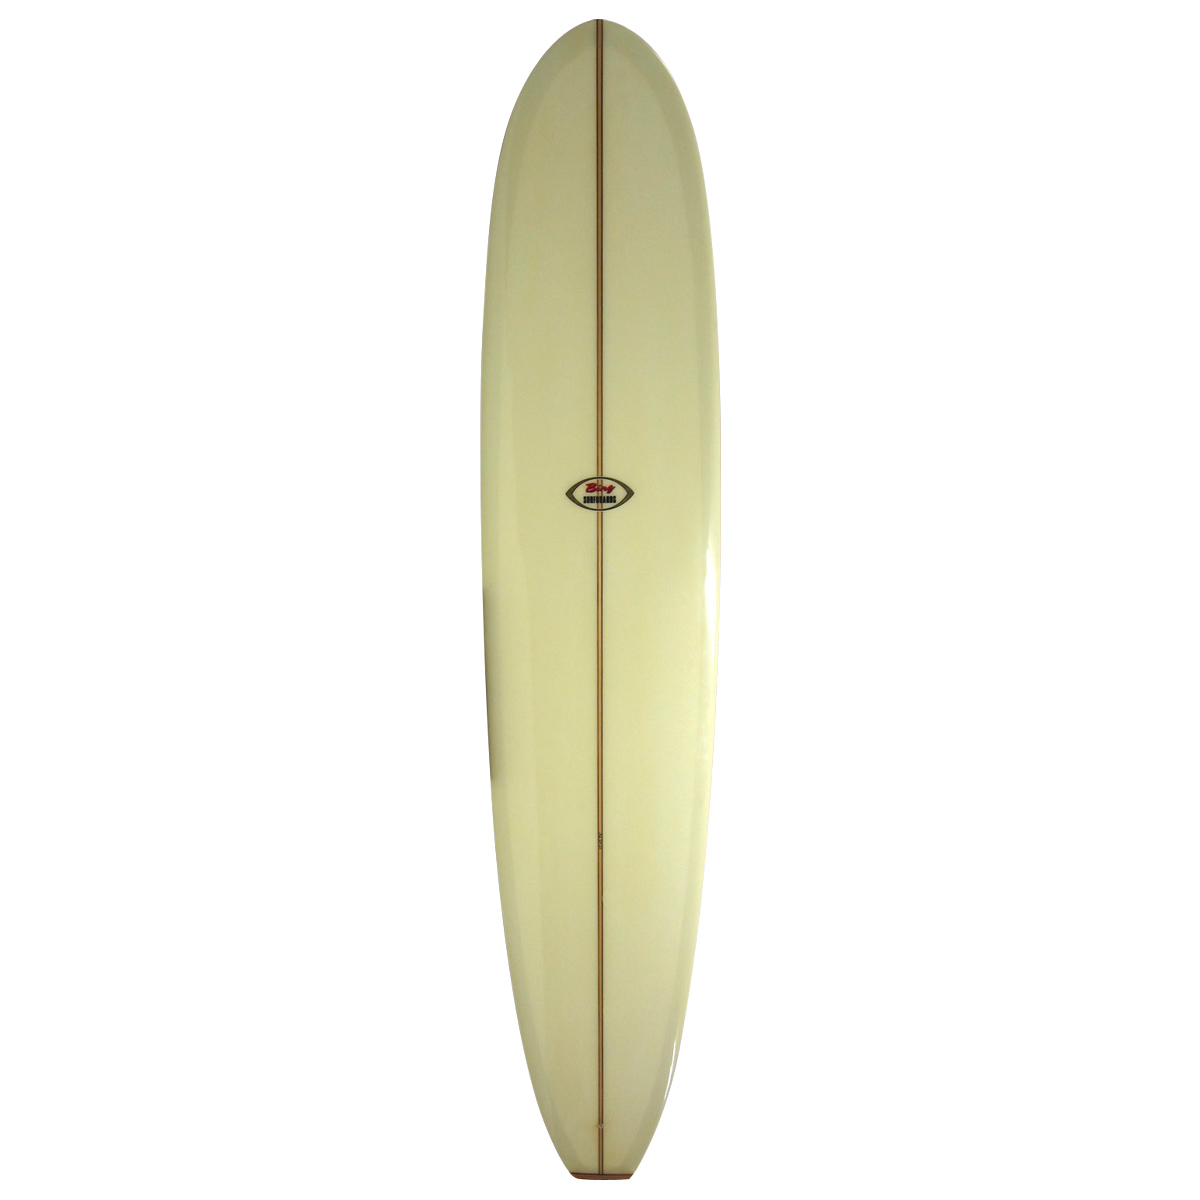 BING / BING / Light Weight 9`6 Step Deck Shaped by Mike Eaton